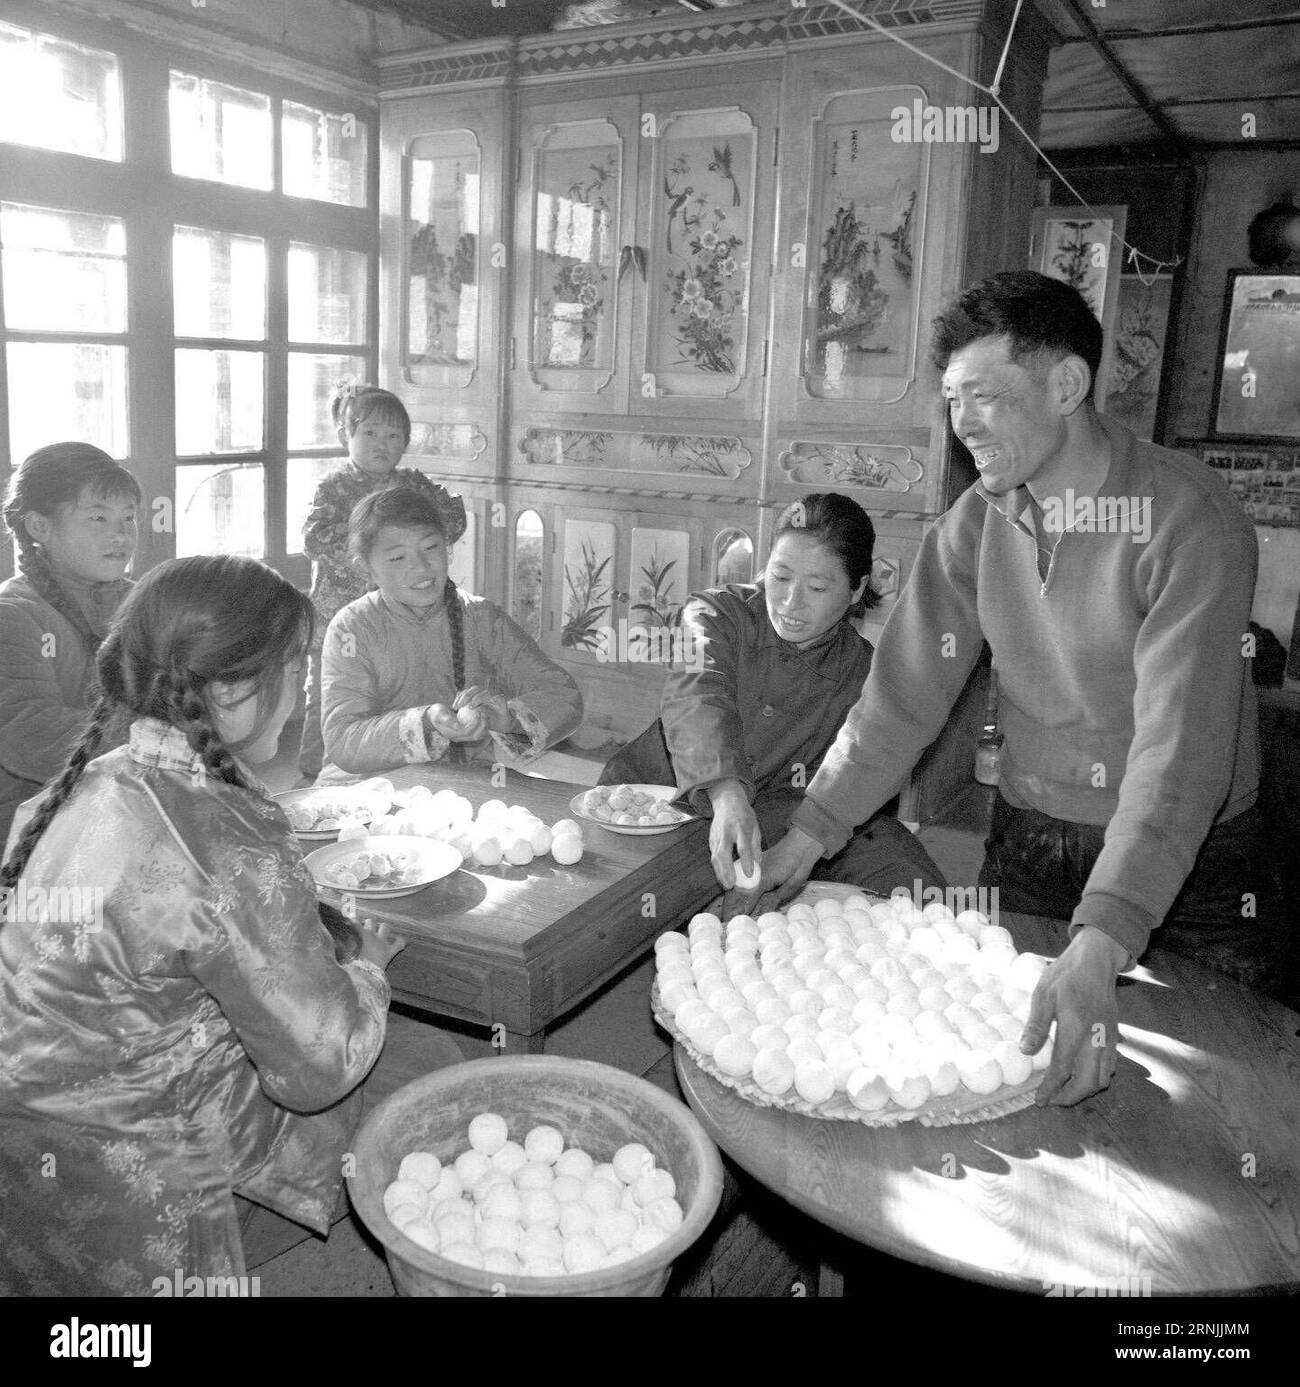 File photo taken in February 1980 shows a family making steamed bun stuffed with sweetened bean paste in Hailun County of northeast China s Heilongjiang Province. The most important spirit of Chinese lunar New Year, or Spring Festival, is family reunion. It is also the happiest time in all ages for Chinese people to get together to enjoy delicious food. ) (lb) CHINA-LUNAR NEW YEAR-FESTIVAL FOOD (CN) LiuxXiangyang PUBLICATIONxNOTxINxCHN   File Photo Taken in February 1980 Shows a Family Making steamed Bun Stuffed With Sweetened Bean Paste in Hailun County of Northeast China S Heilongjiang Provi Stock Photo